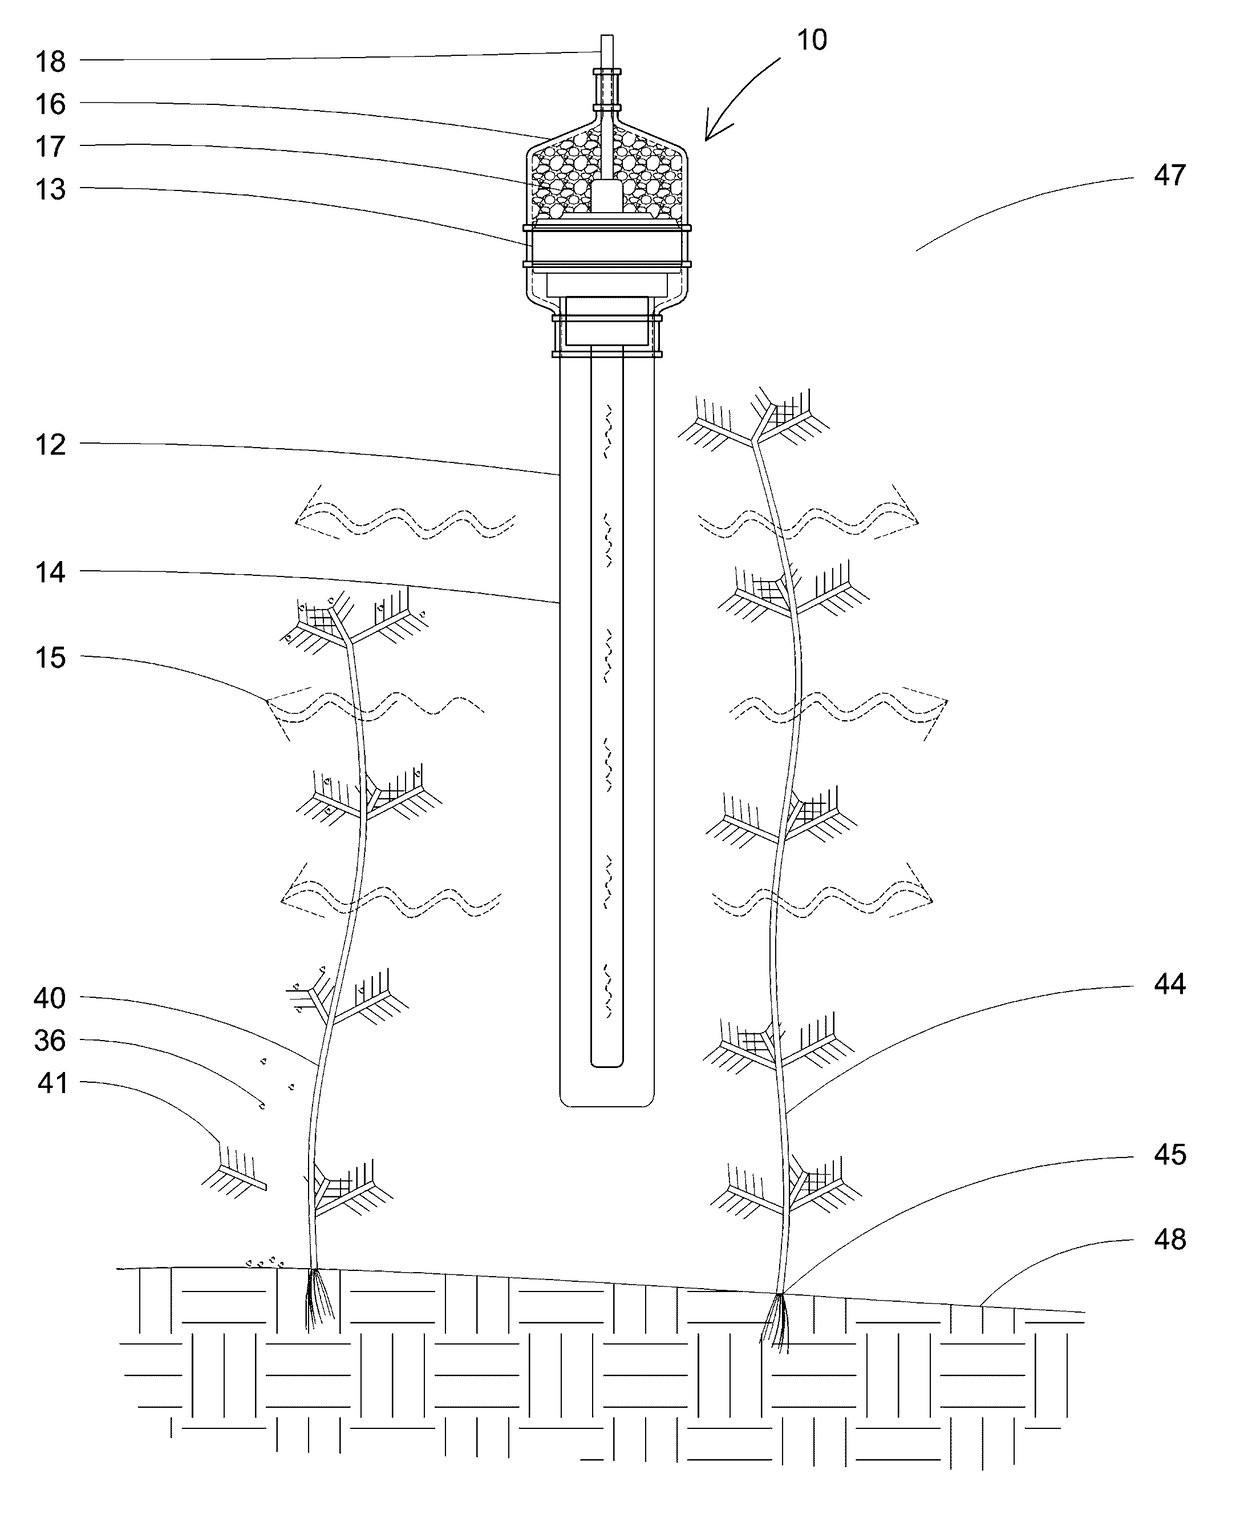 Short-wavelength ultraviolet light array for aquatic invasive weed species control apparatus and method